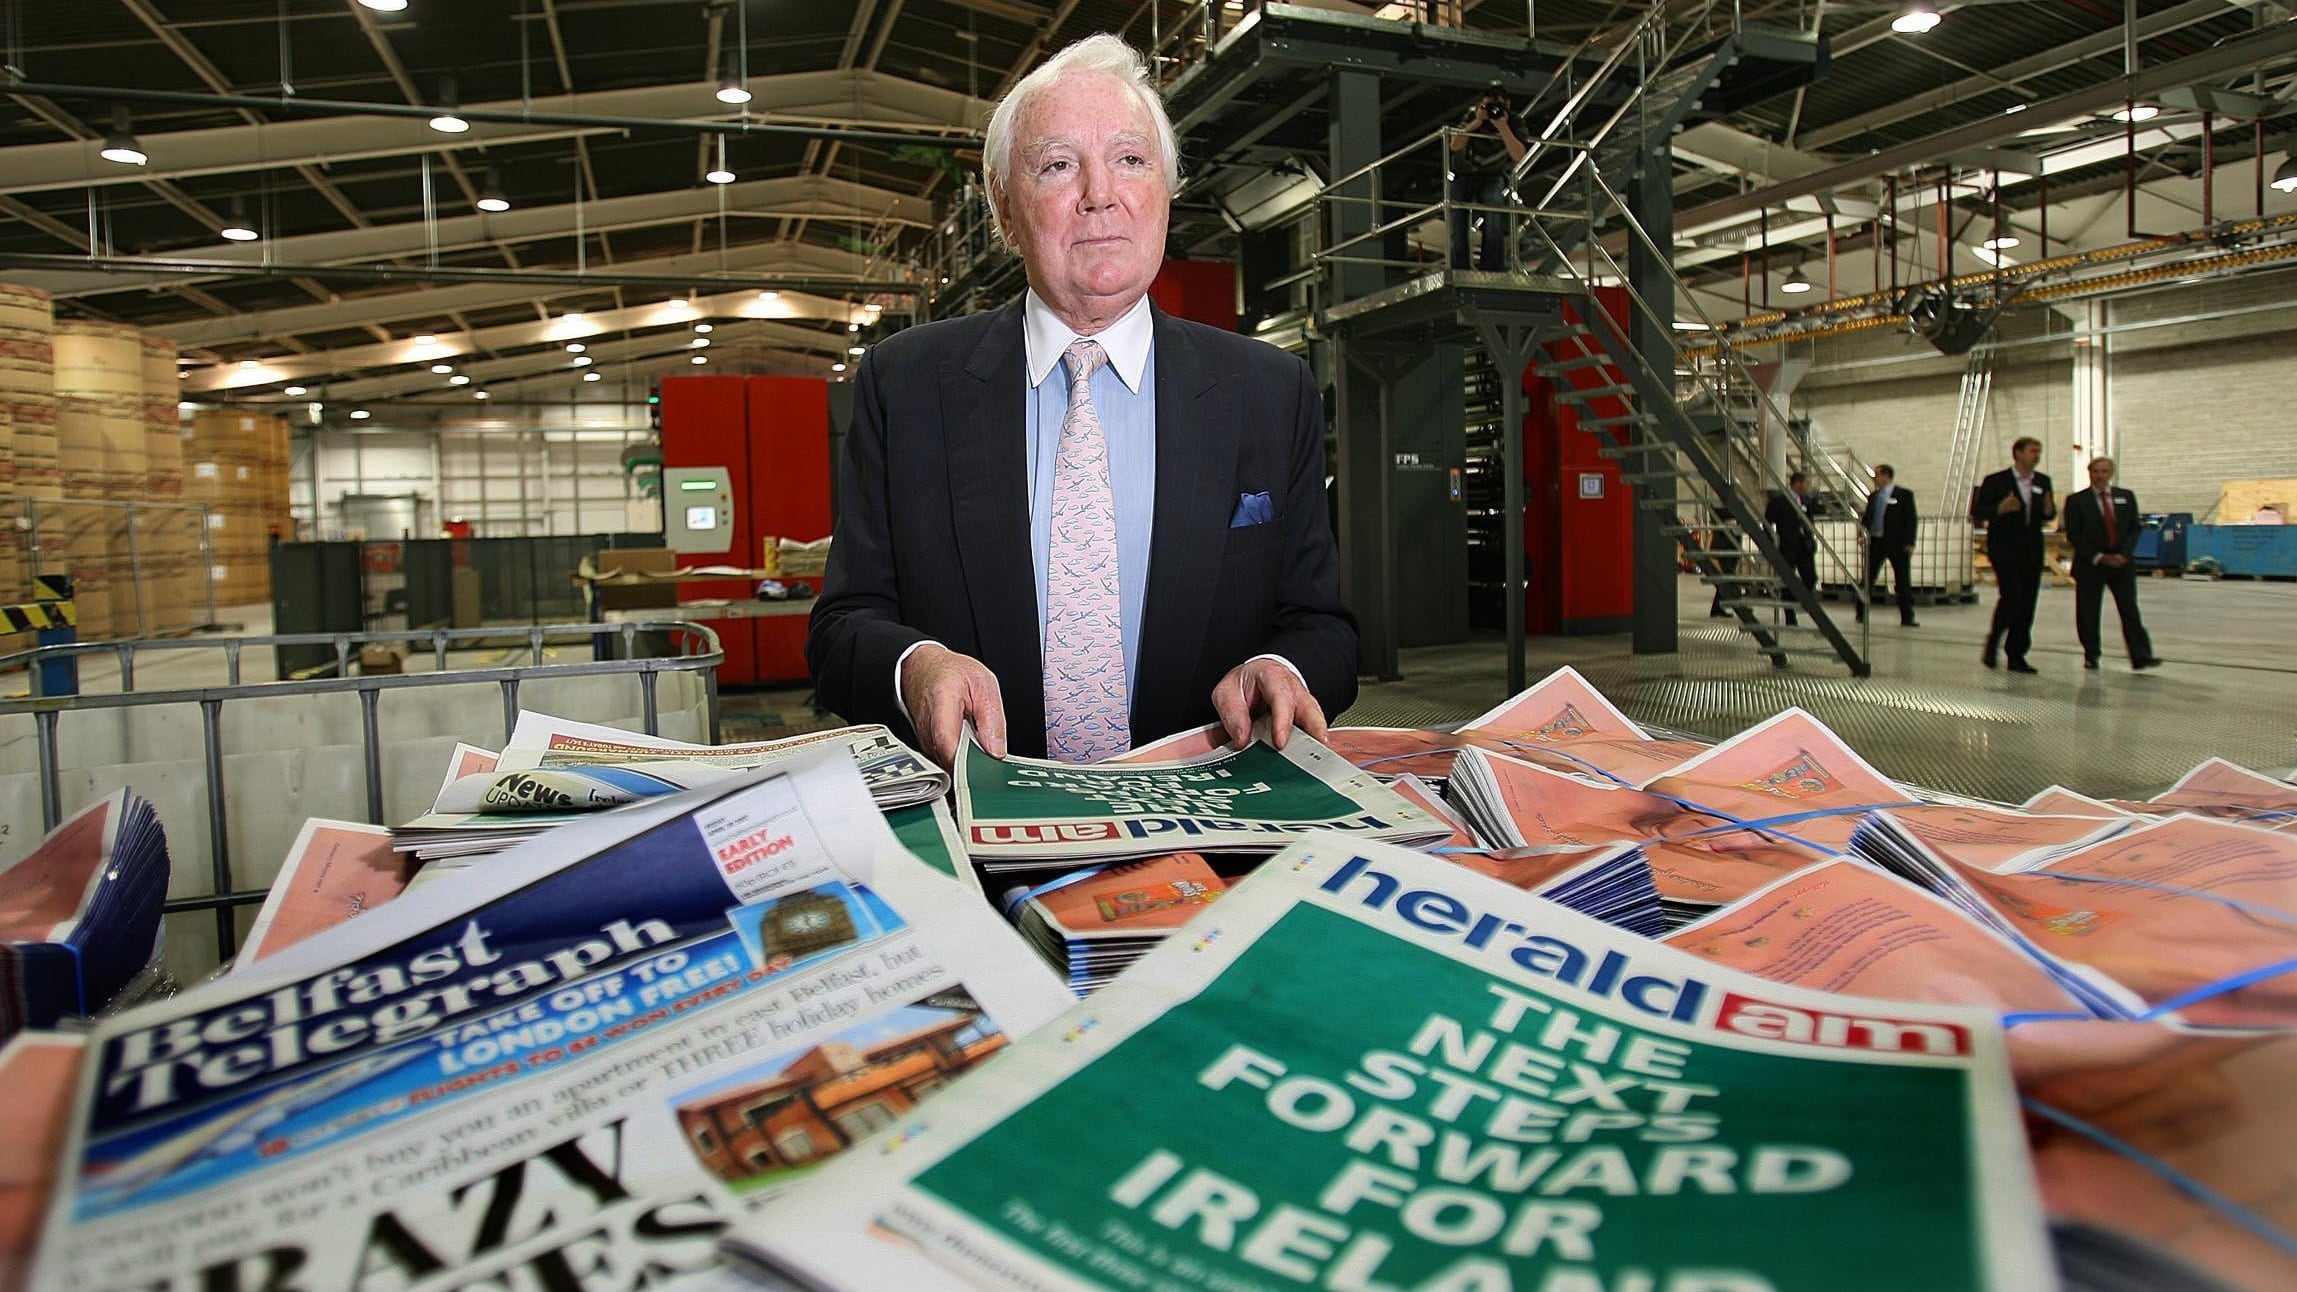 Tony O’Reilly’s northern media interviews included the Belfast Telegraph, Sunday Life and Sunday World newspapers.